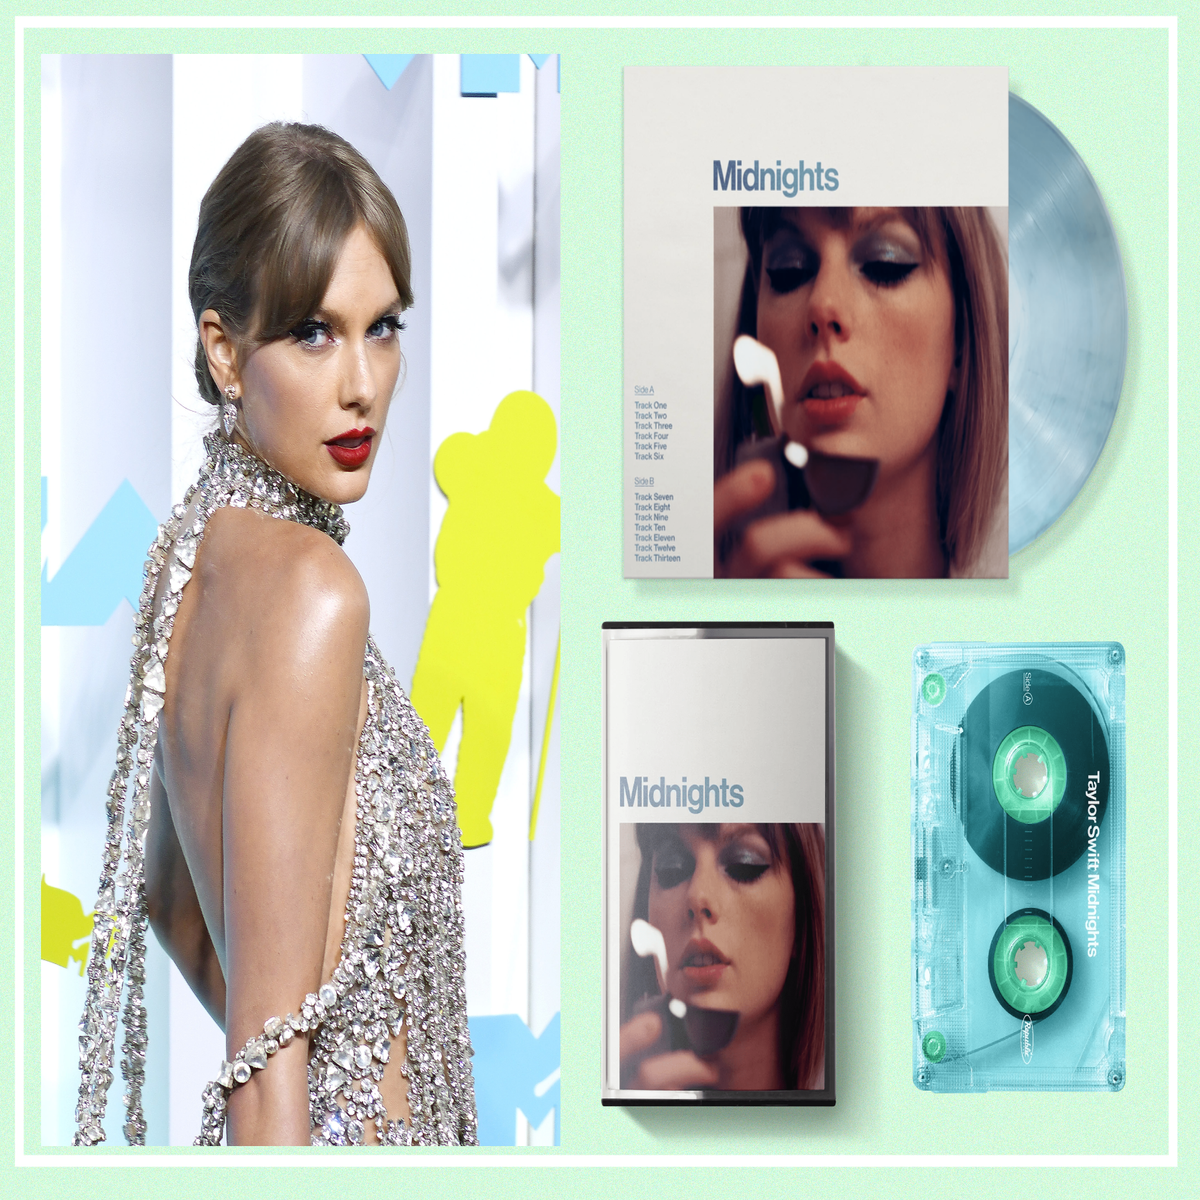 https://static.independent.co.uk/2022/08/30/11/Taylor-Swift-pre-order-album-indybest.png?width=1200&height=1200&fit=crop